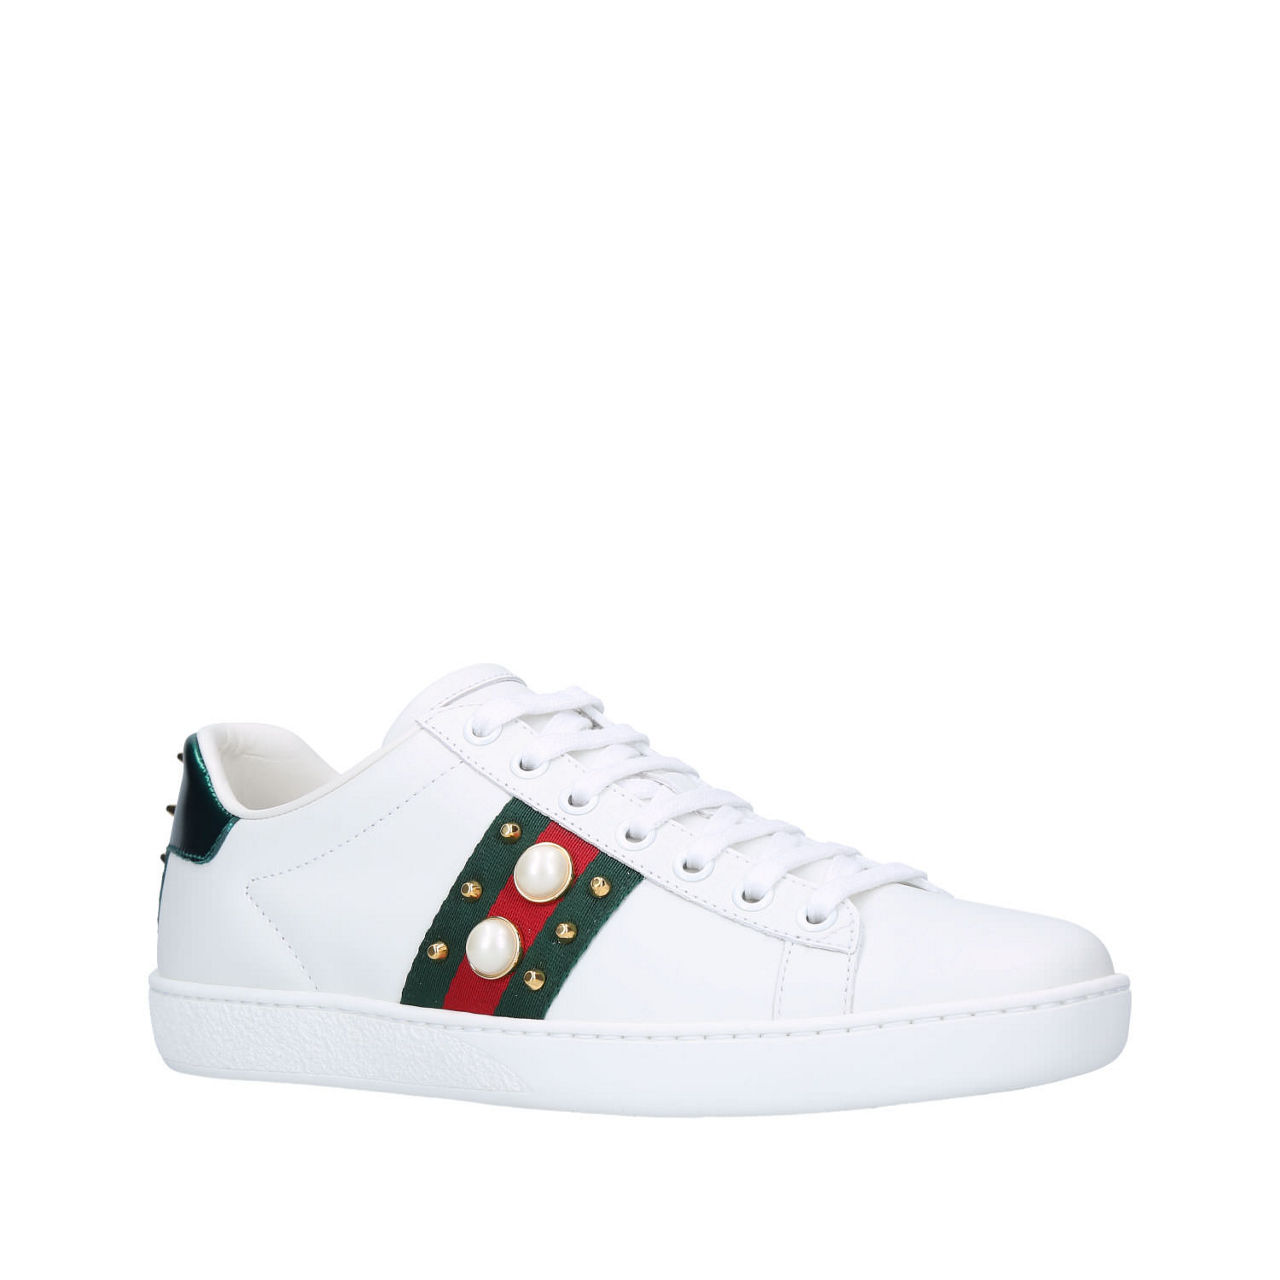 You Can Now 'Try On' Gucci's Signature Ace Sneakers With an App